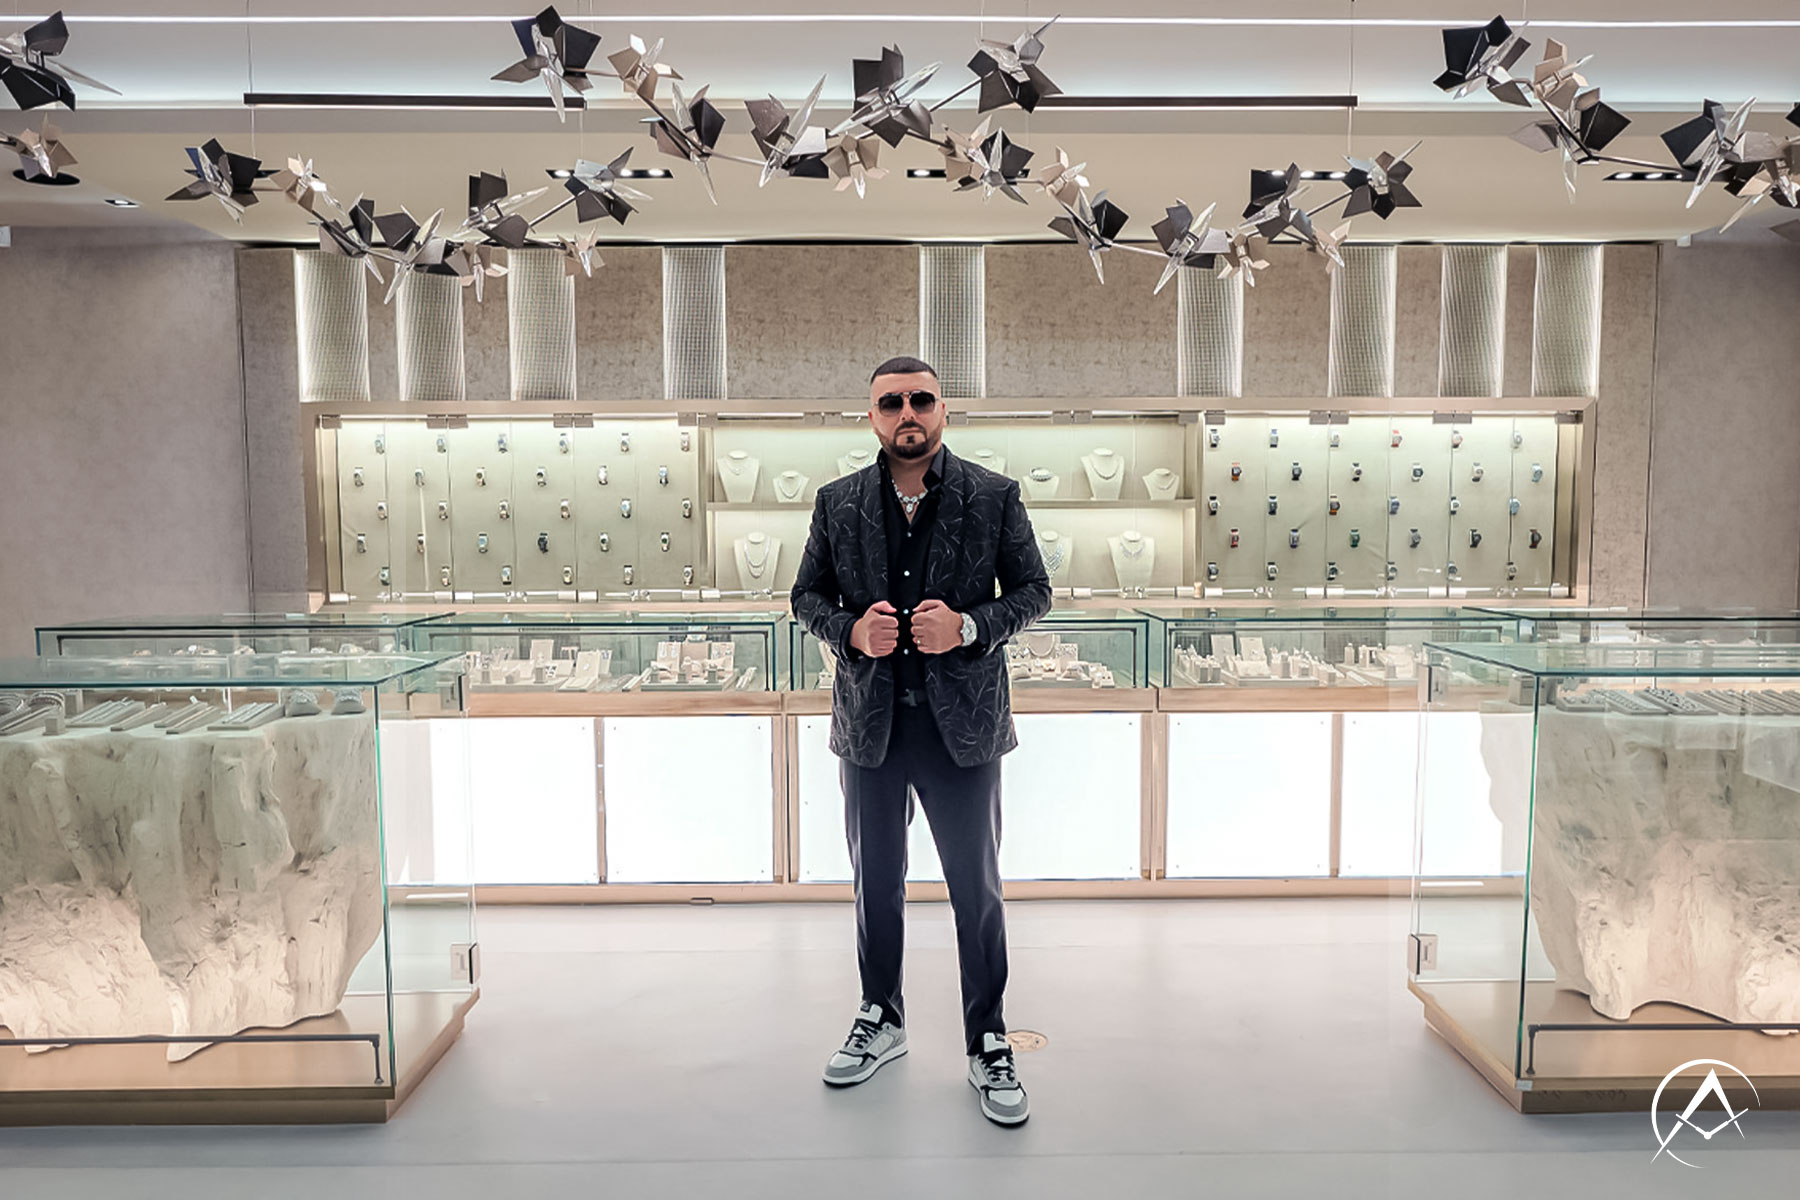 Avi Hiaeve Stands in the Middle of his Miami Showroom, Surrounded by Watches and Jewelry in Display Cases, Wearing a Black Suit, Avi & Co. Limited Edition Timepiece, and The Crown Chain.